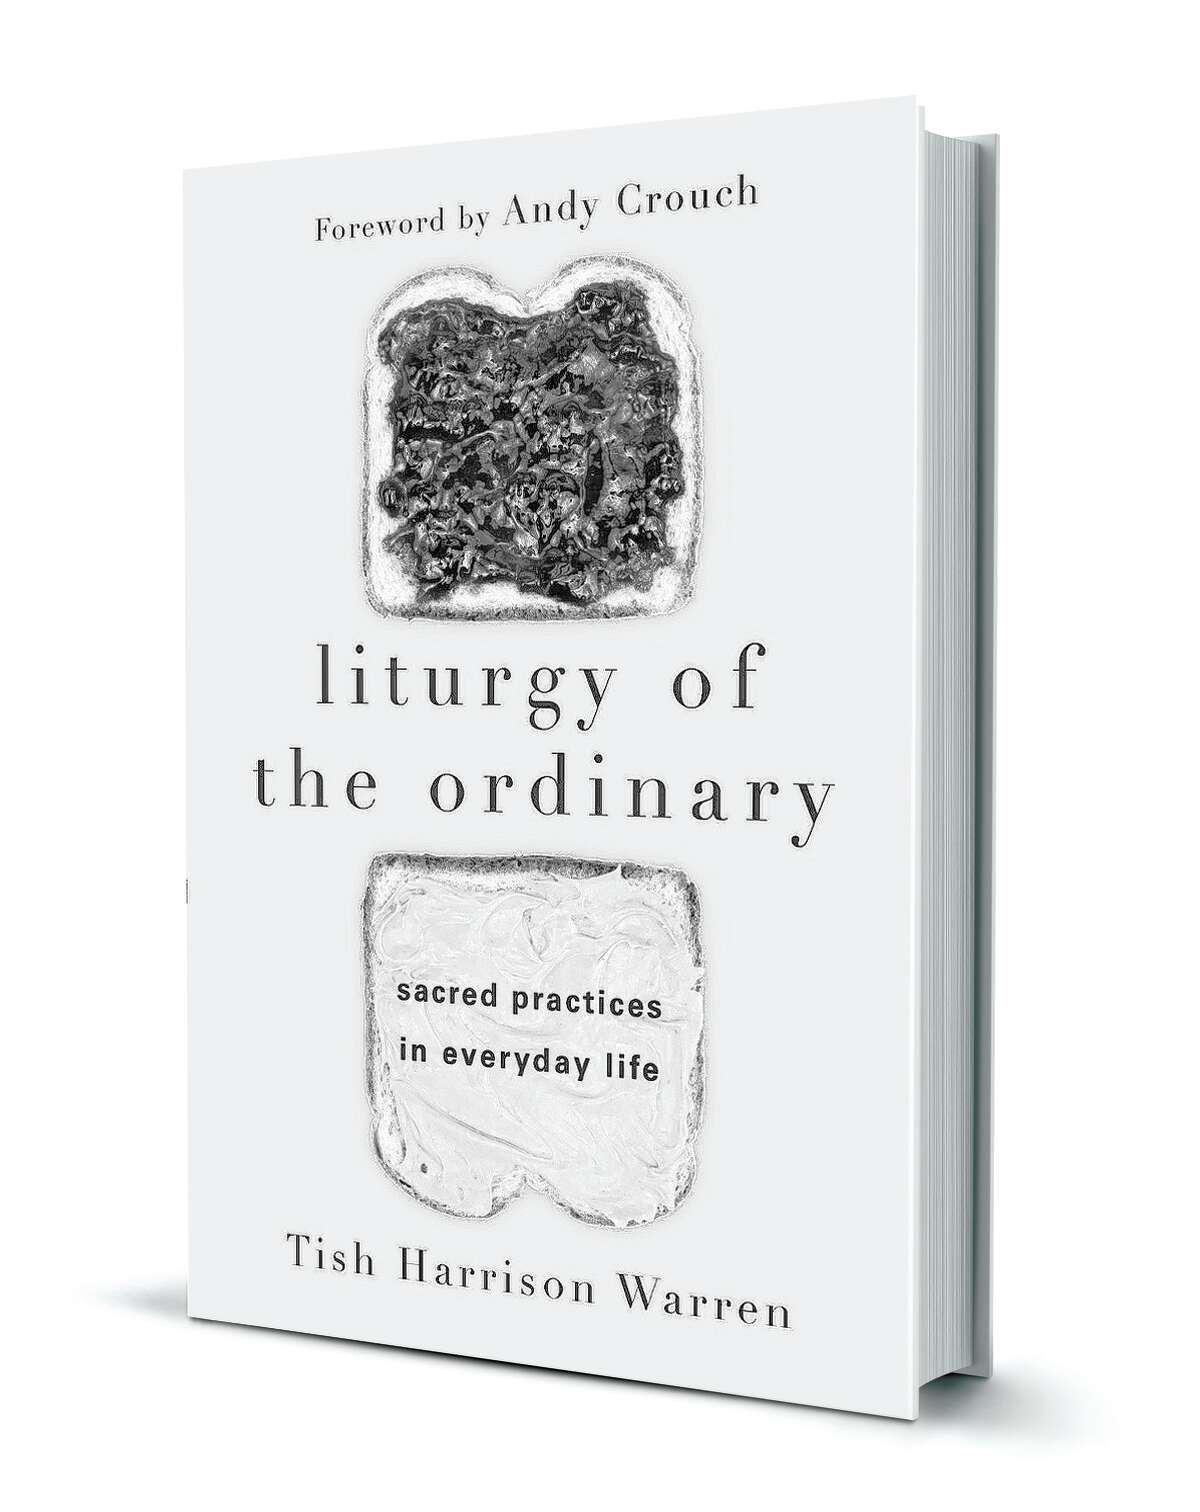 Making a bed is among the daily "rituals that shape us and point to profound meaning about what is good, true and beautiful," explains Tish Harrison Warren, author of "Liturgy of the Ordinary."